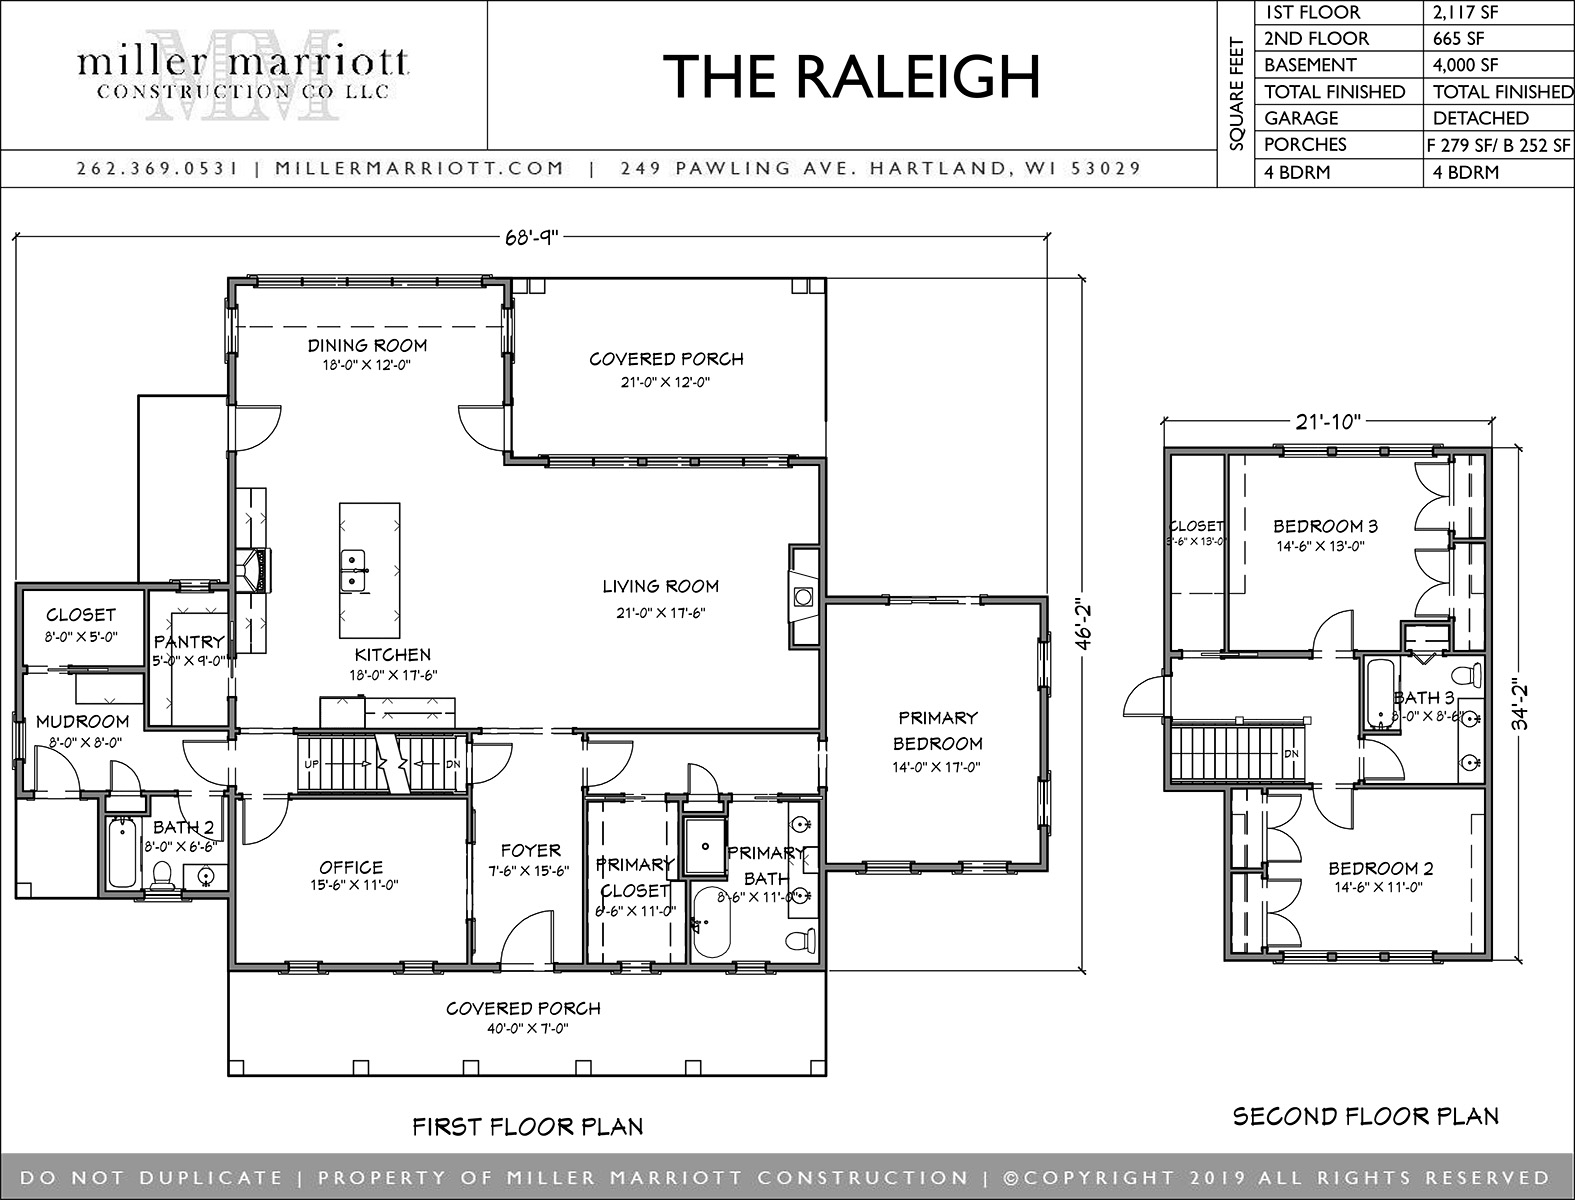 The Raleigh First and Second Floor Plans